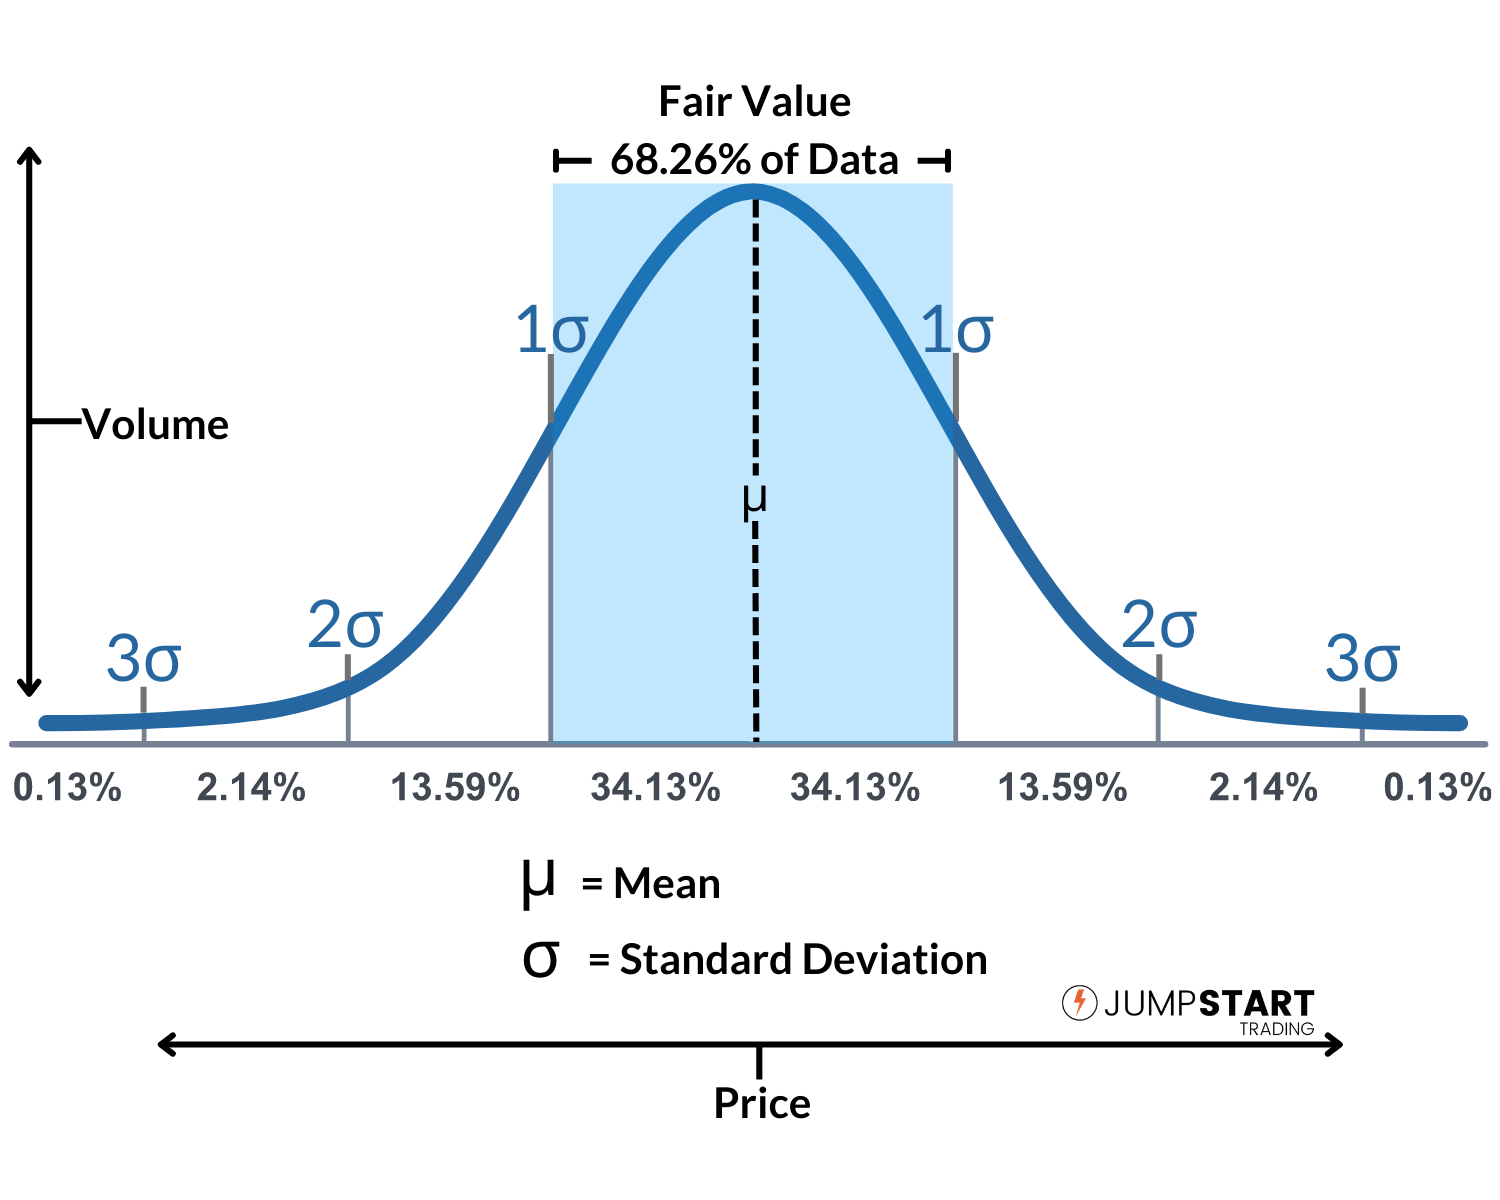 Graph Showing Fair Value of Security represented by 1 Standard Deviation